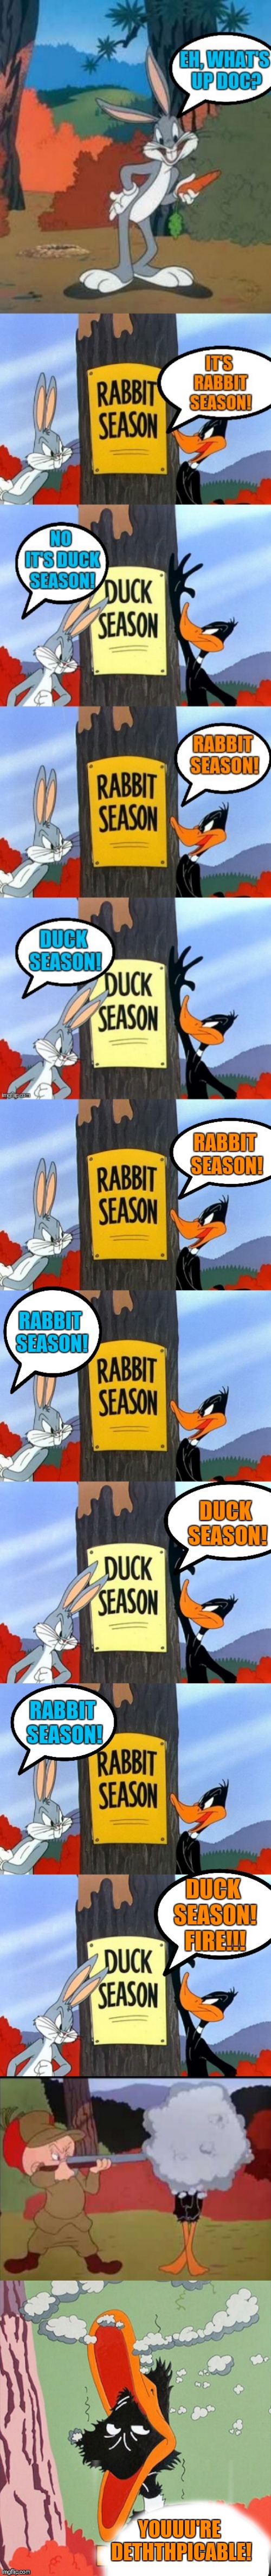 Repost Your Own Memes Week, April 16th until... (A Socrates and Craziness_all_the_way_event) | YOUUU'RE DETHTHPICABLE! | image tagged in memes,funny,repost your own memes week,looney tunes,daffy duck,44colt | made w/ Imgflip meme maker